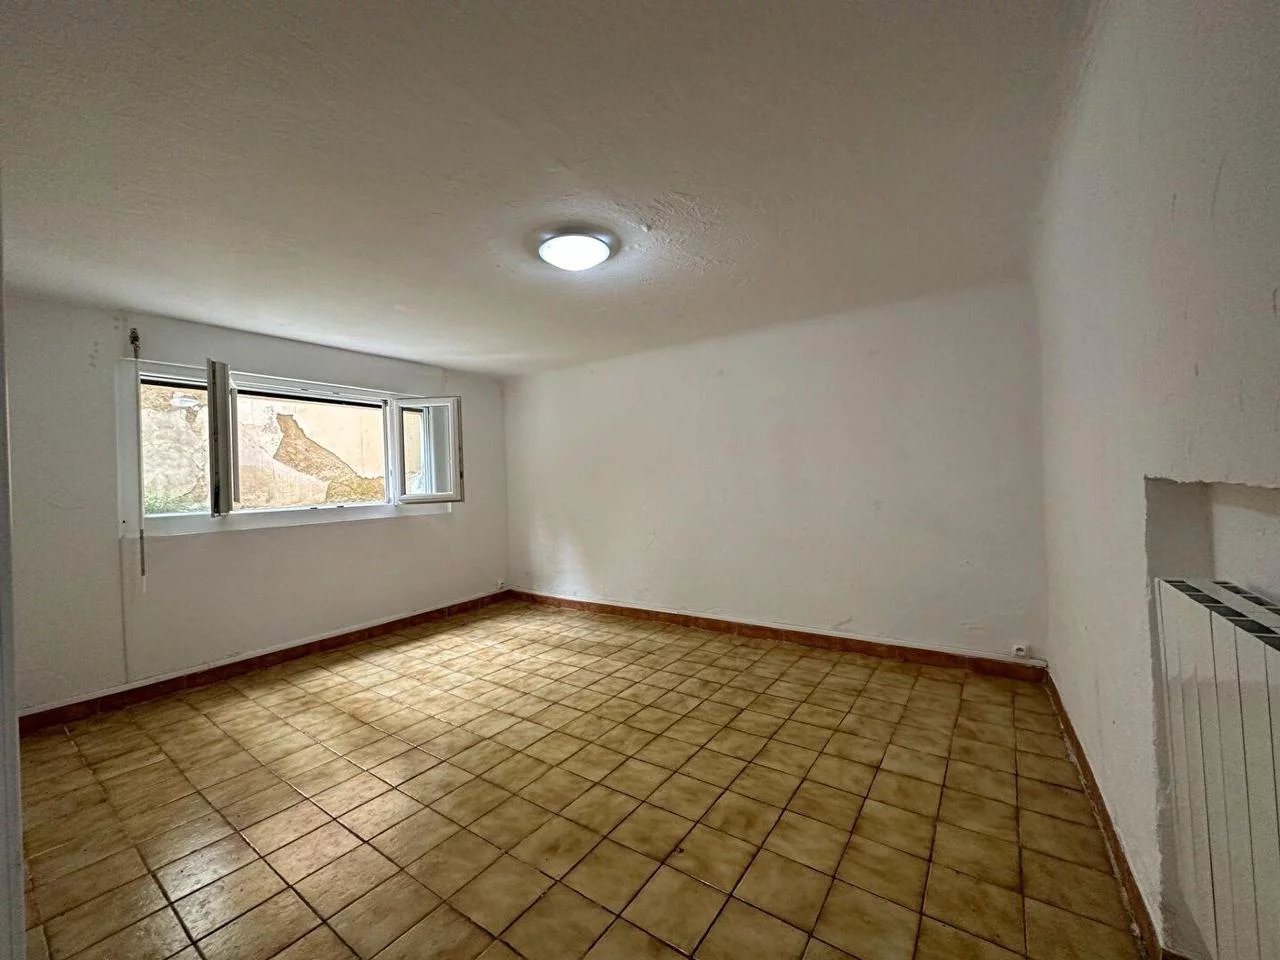 Appartement  1 Rooms 23.81m2  for sale    79 000 €